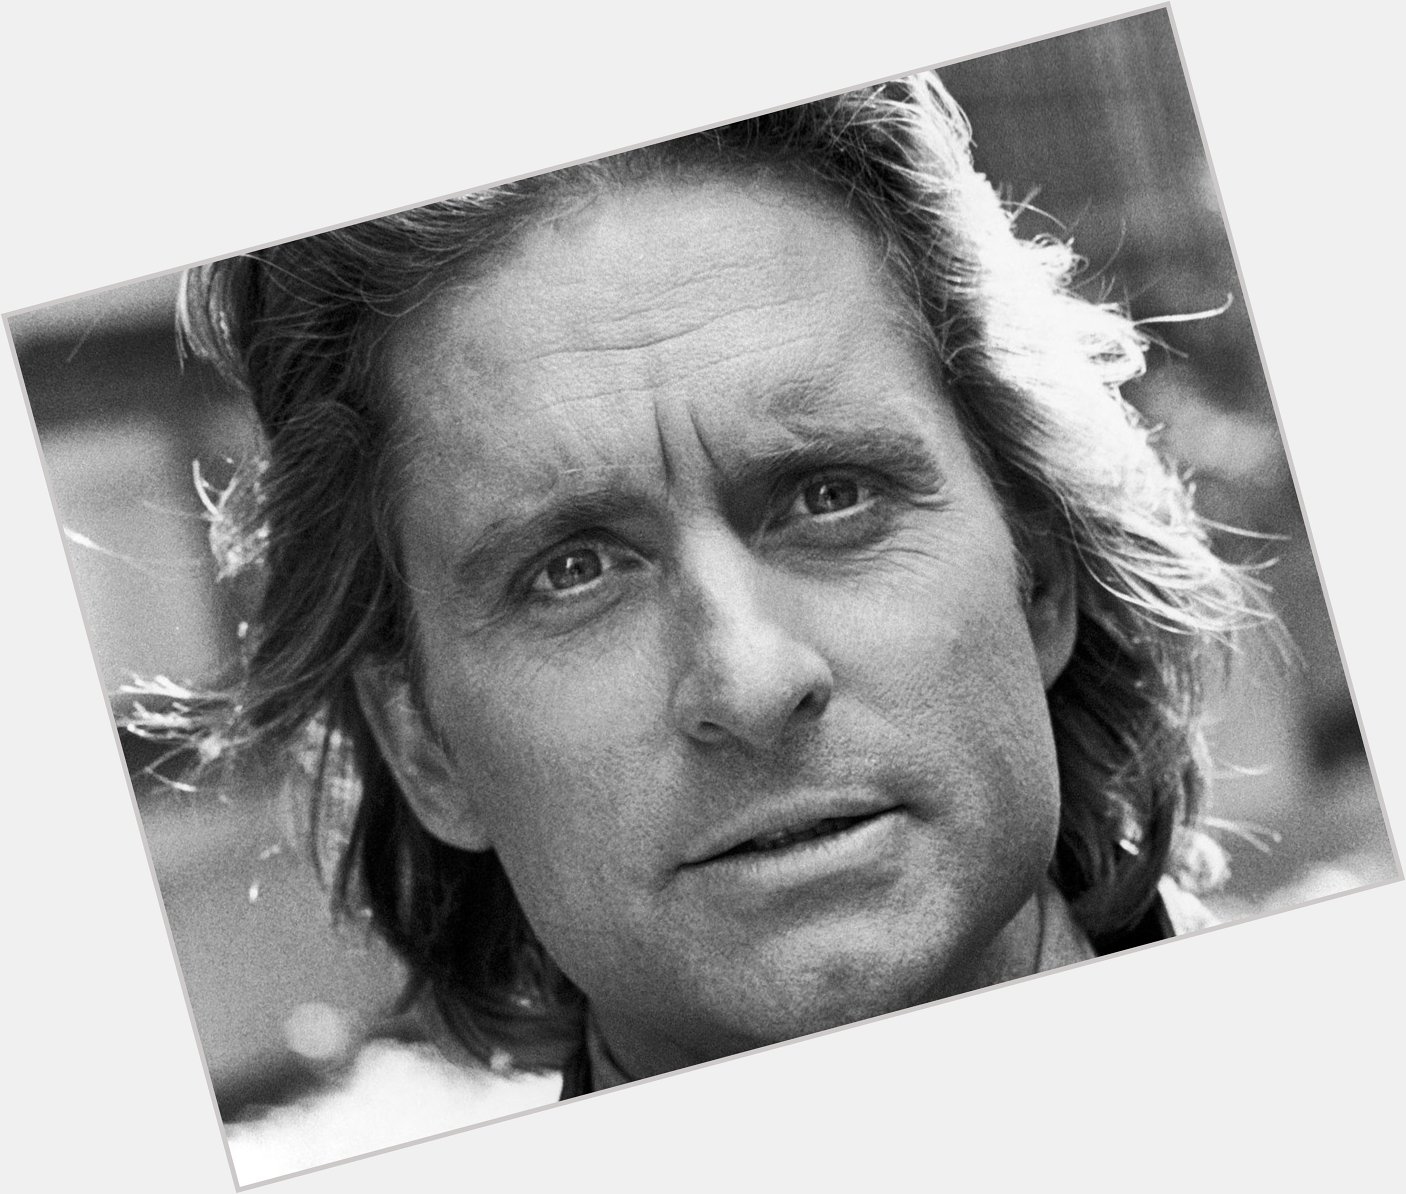 Happy Birthday to one of my all-time favorite actors, Michael Douglas! 